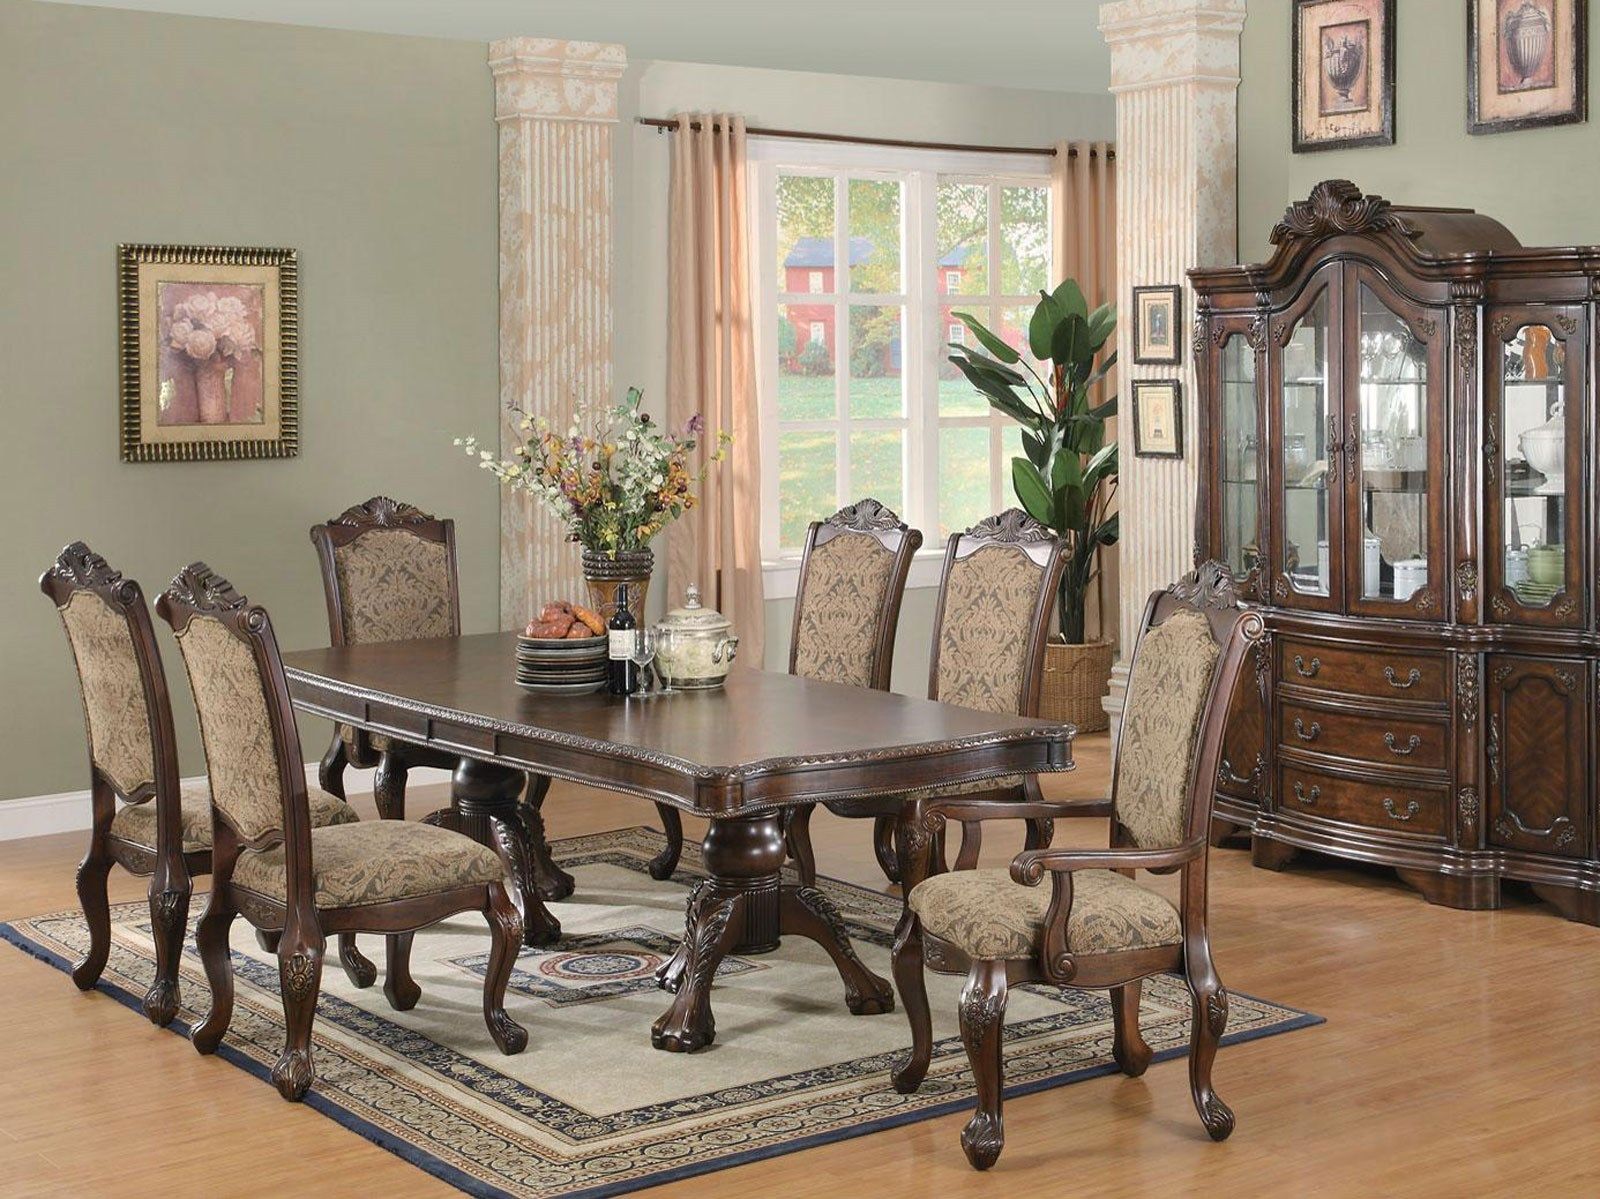 Formal Dining Applying Enchanting Formal Dining Room Sets Applying Wooden Furniture With Dining Table And Cupboard In Brown Color Completed With Chairs On Rug And Decorated With Vase Flowers Dining Room Formal Dining Room Sets For Contemporary Interiors